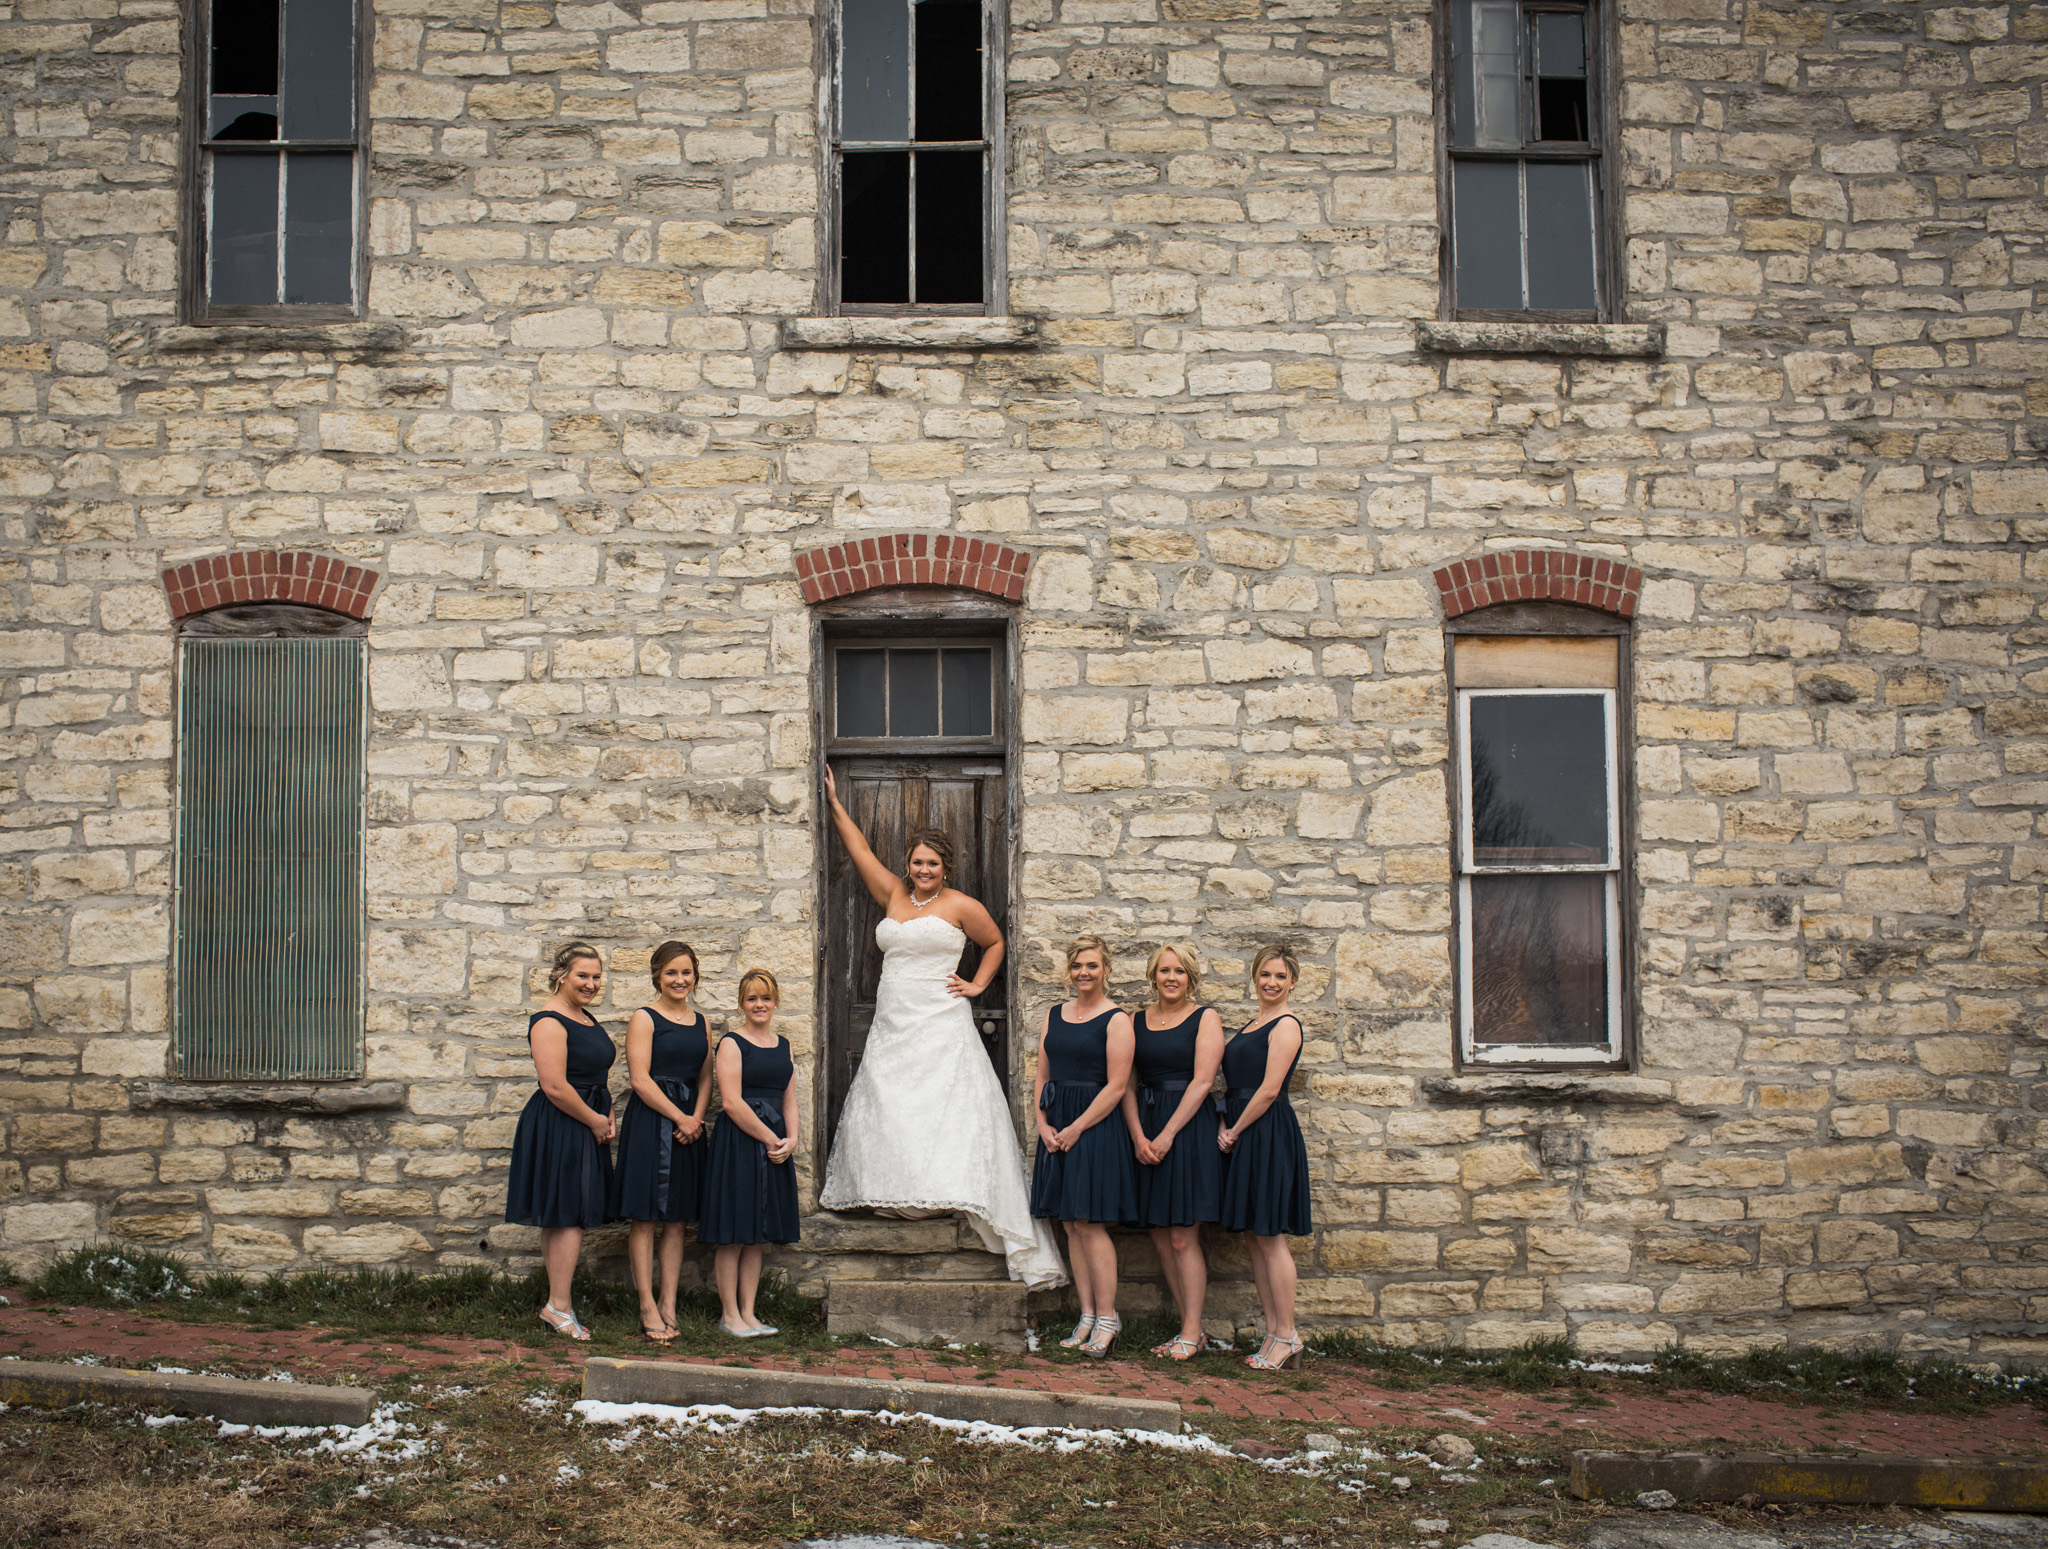 Zibell Spring Wedding, Bride and Groom, Powerful, Connected, Exploration, Laura Duggleby Photography -93.JPG